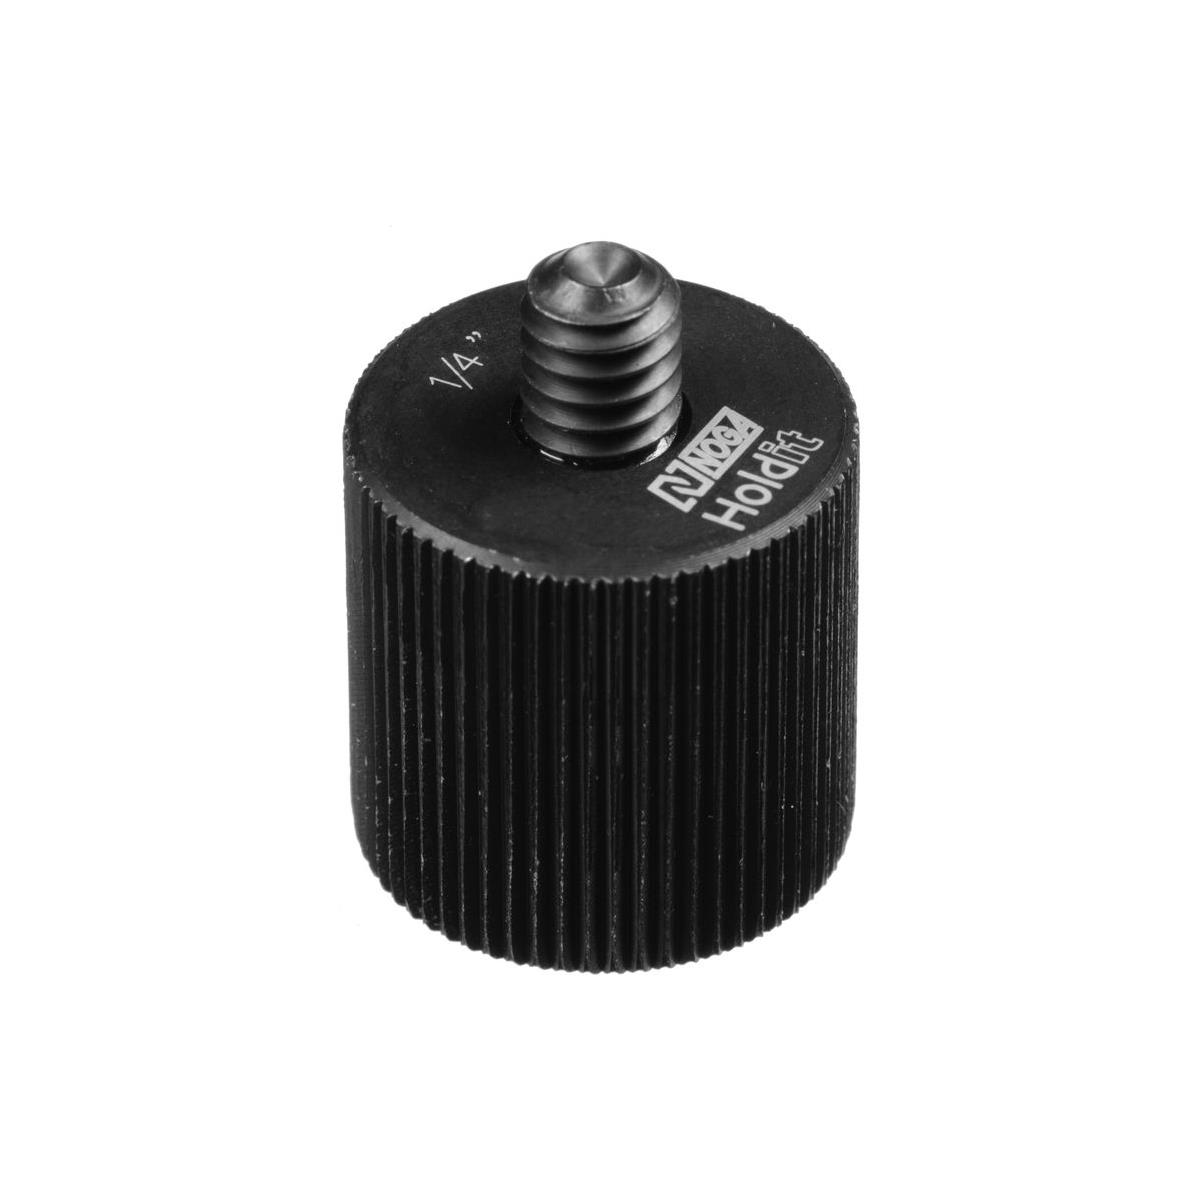 Noga Converter with 1/4" Internal and 1/4" External Threads -  AD2000